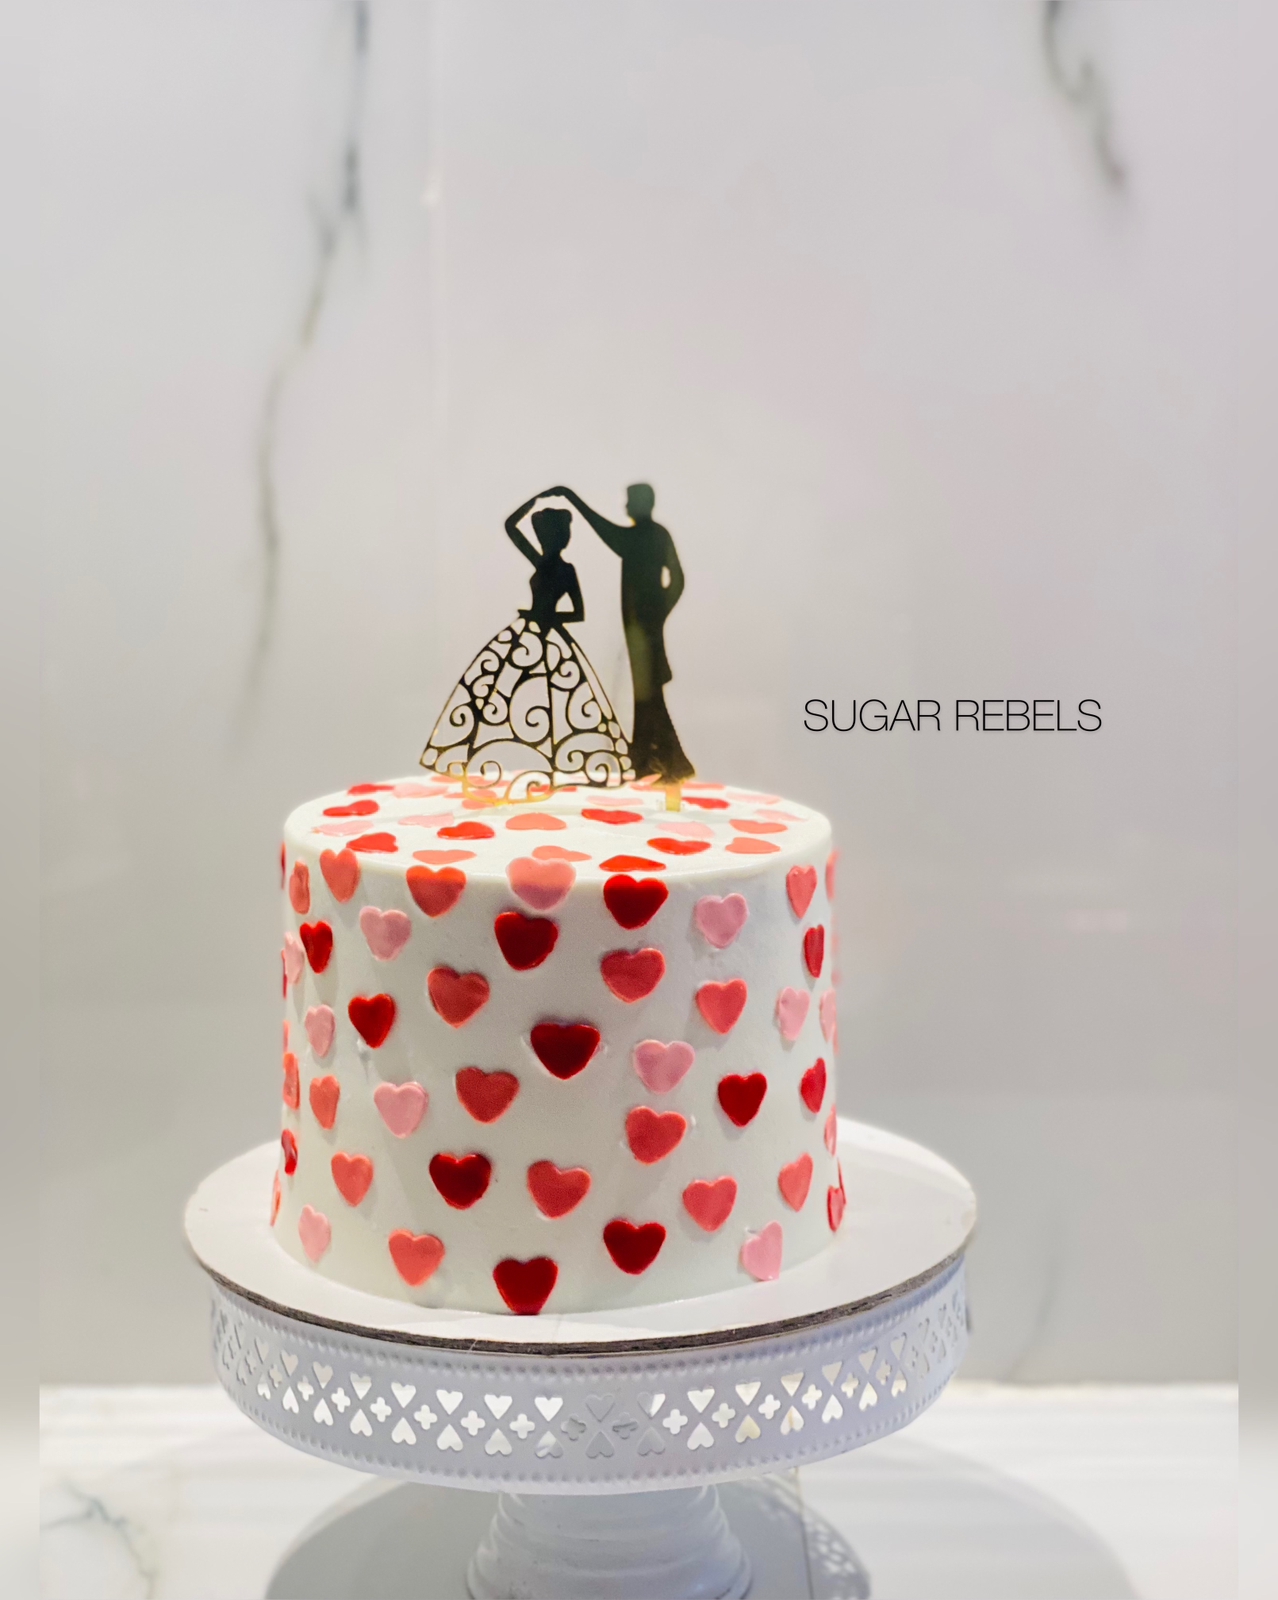 Engagement party cakes to suit every couple | Easy Weddings